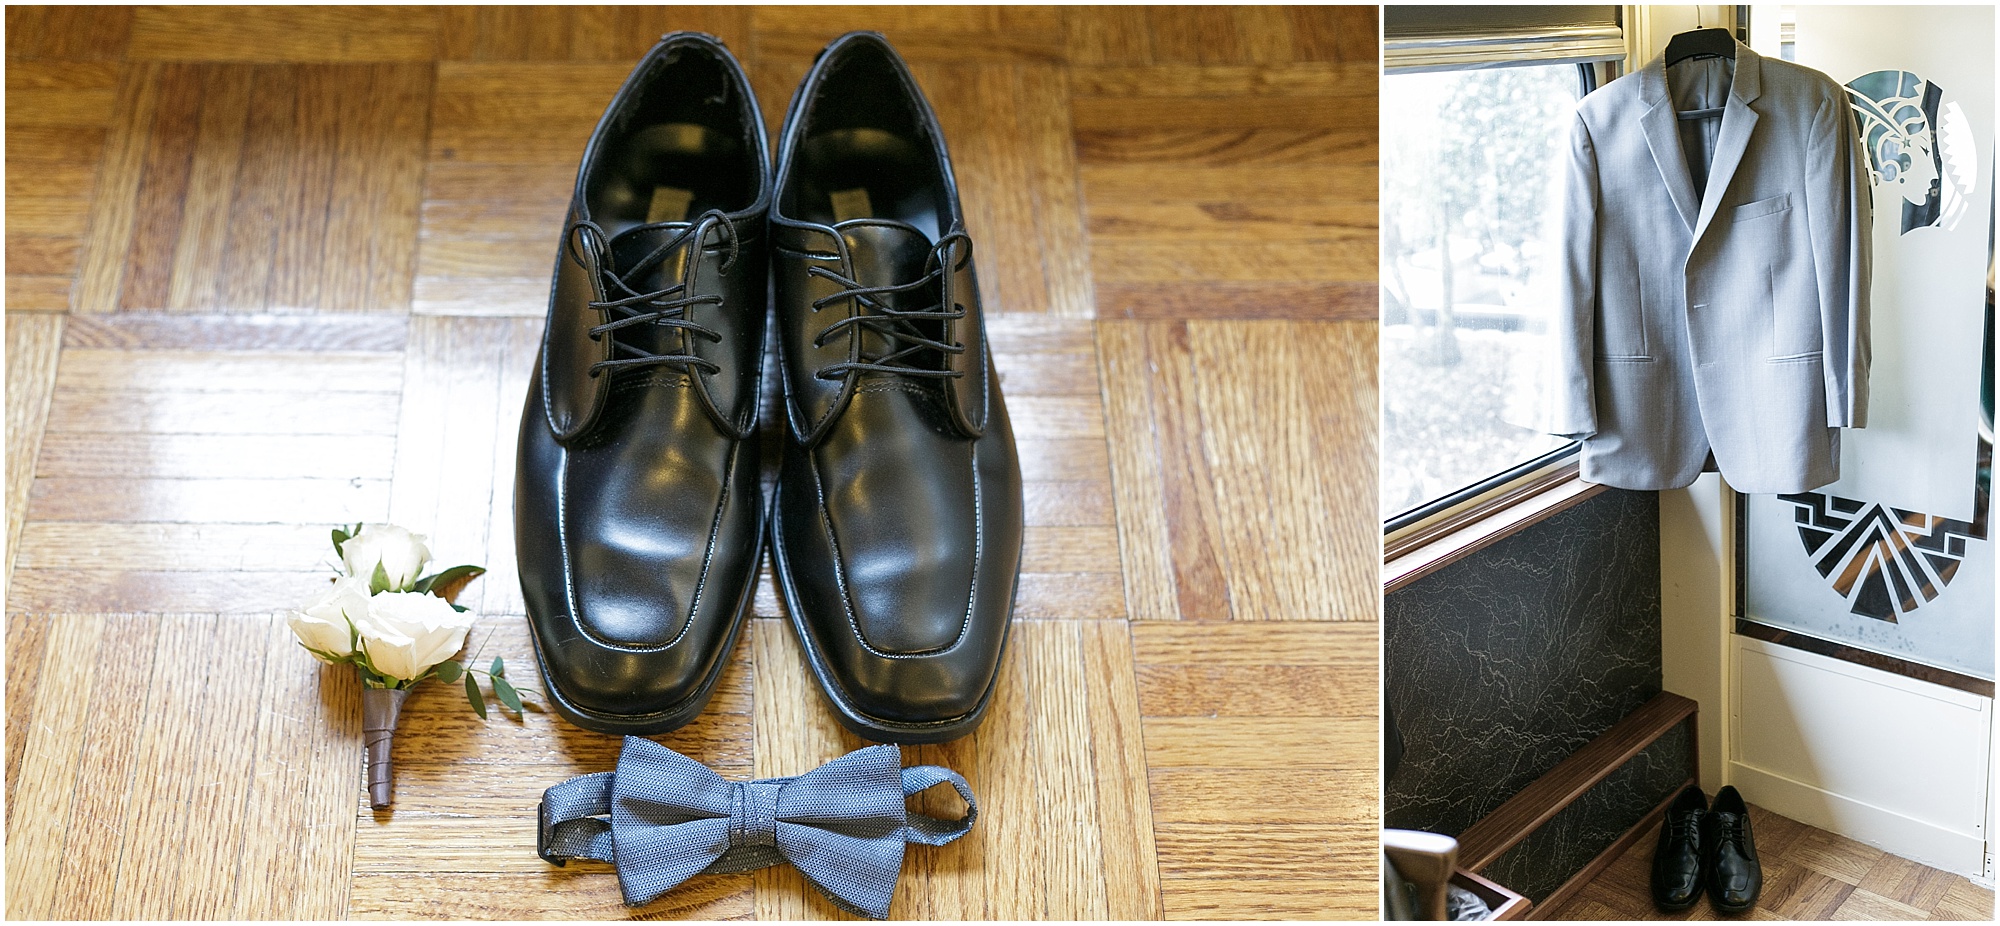 Photo of the grooms black shoes, gray jacket, blue bowtie and white rose boutonnière.